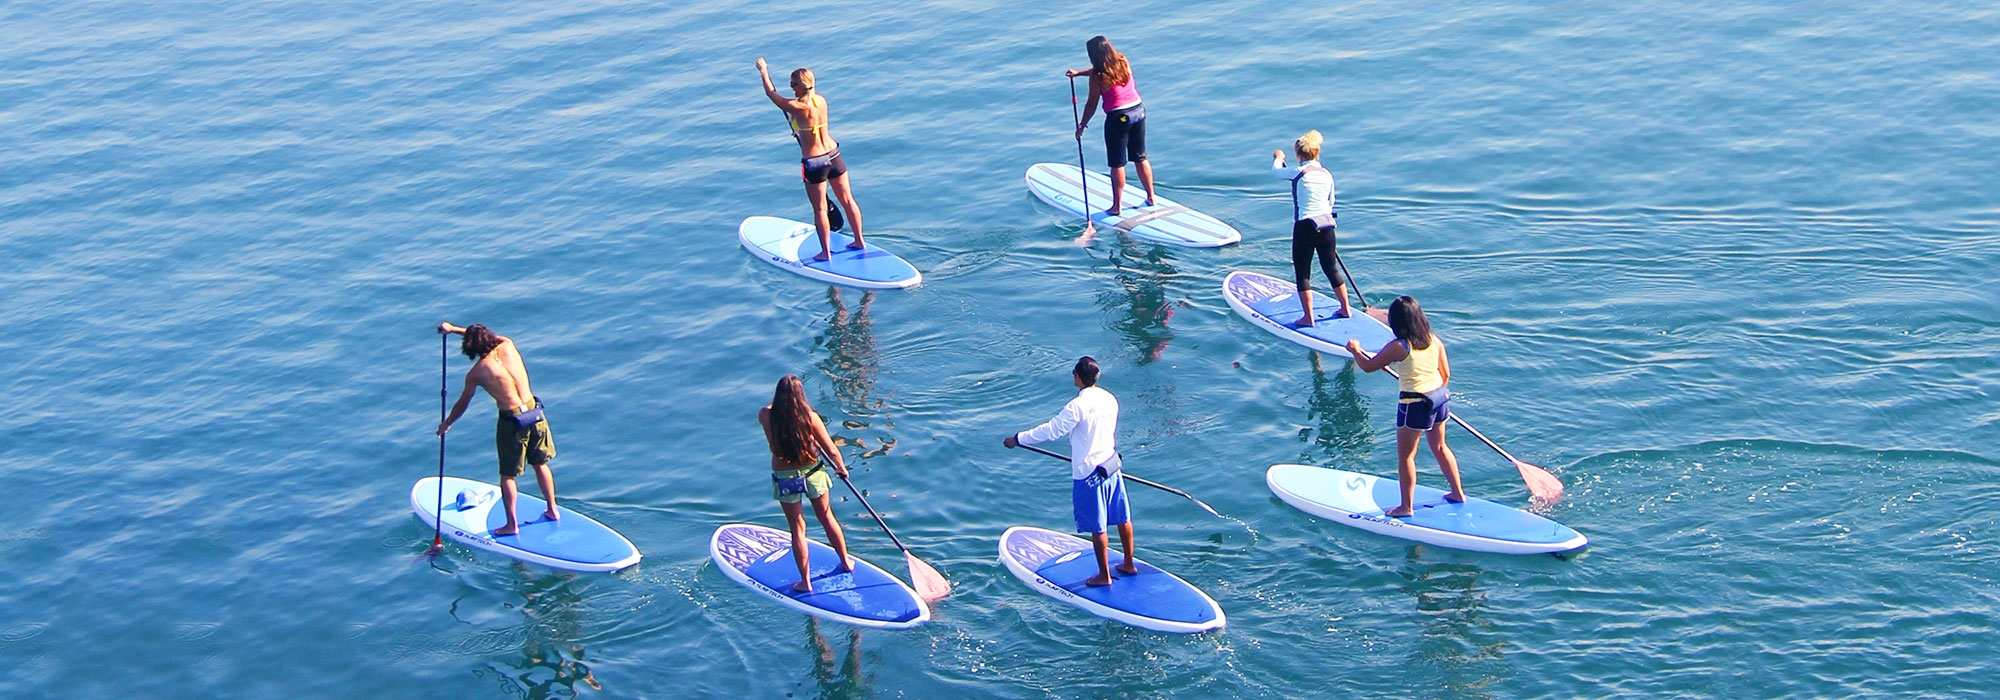 Mission Bay Aquatic Paddleboarding class - areal shot